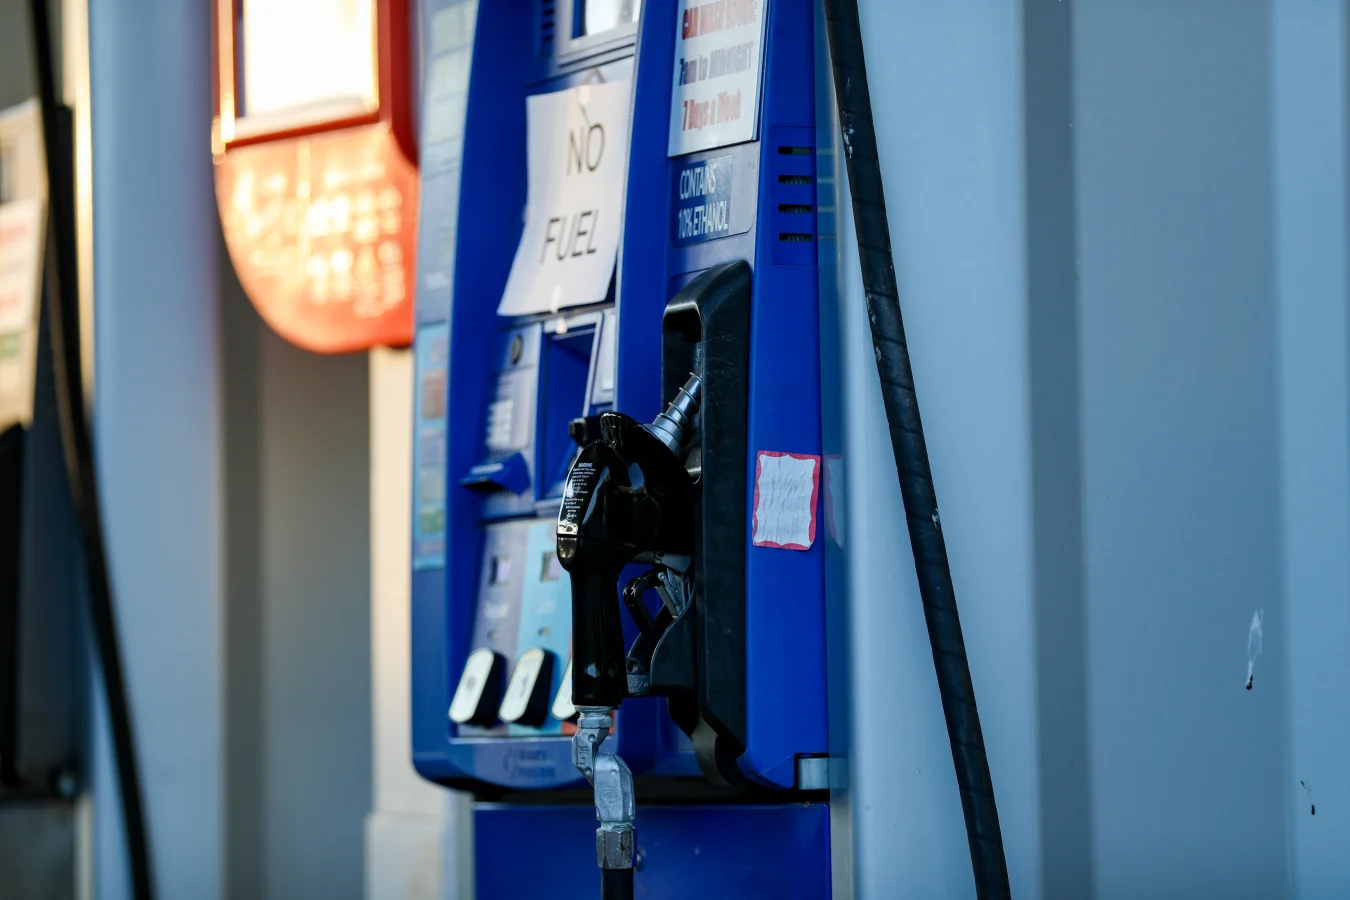 WASHINGTON, USA - MAY 12: Gas pumps closed after ransomware cyberattack causes Colonial Pipeline to shut down, resulting in shortages in Washington D.C, United States on May 12, 2021. (Photo by Yasin Ozturk/Anadolu Agency via Getty Images)